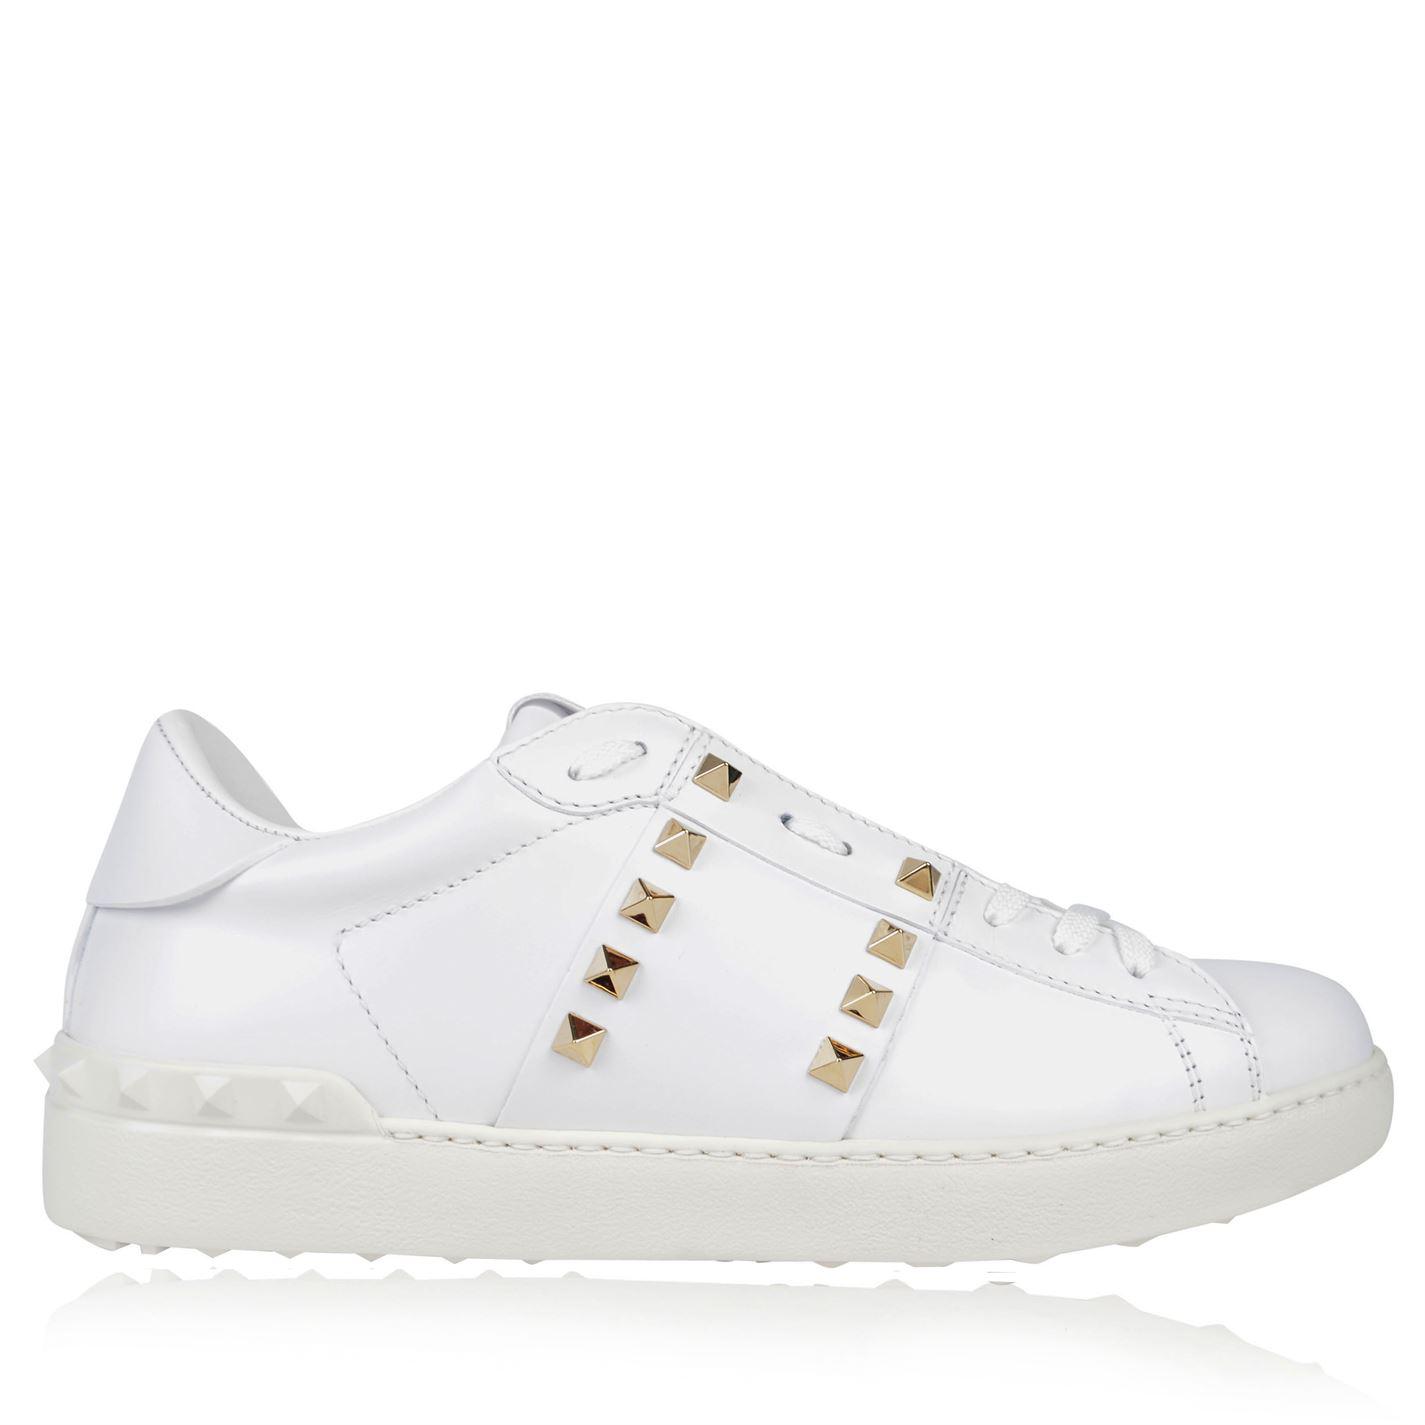 Lyst - Valentino Rockstud Untitled Trainers in White - Save 0. ...